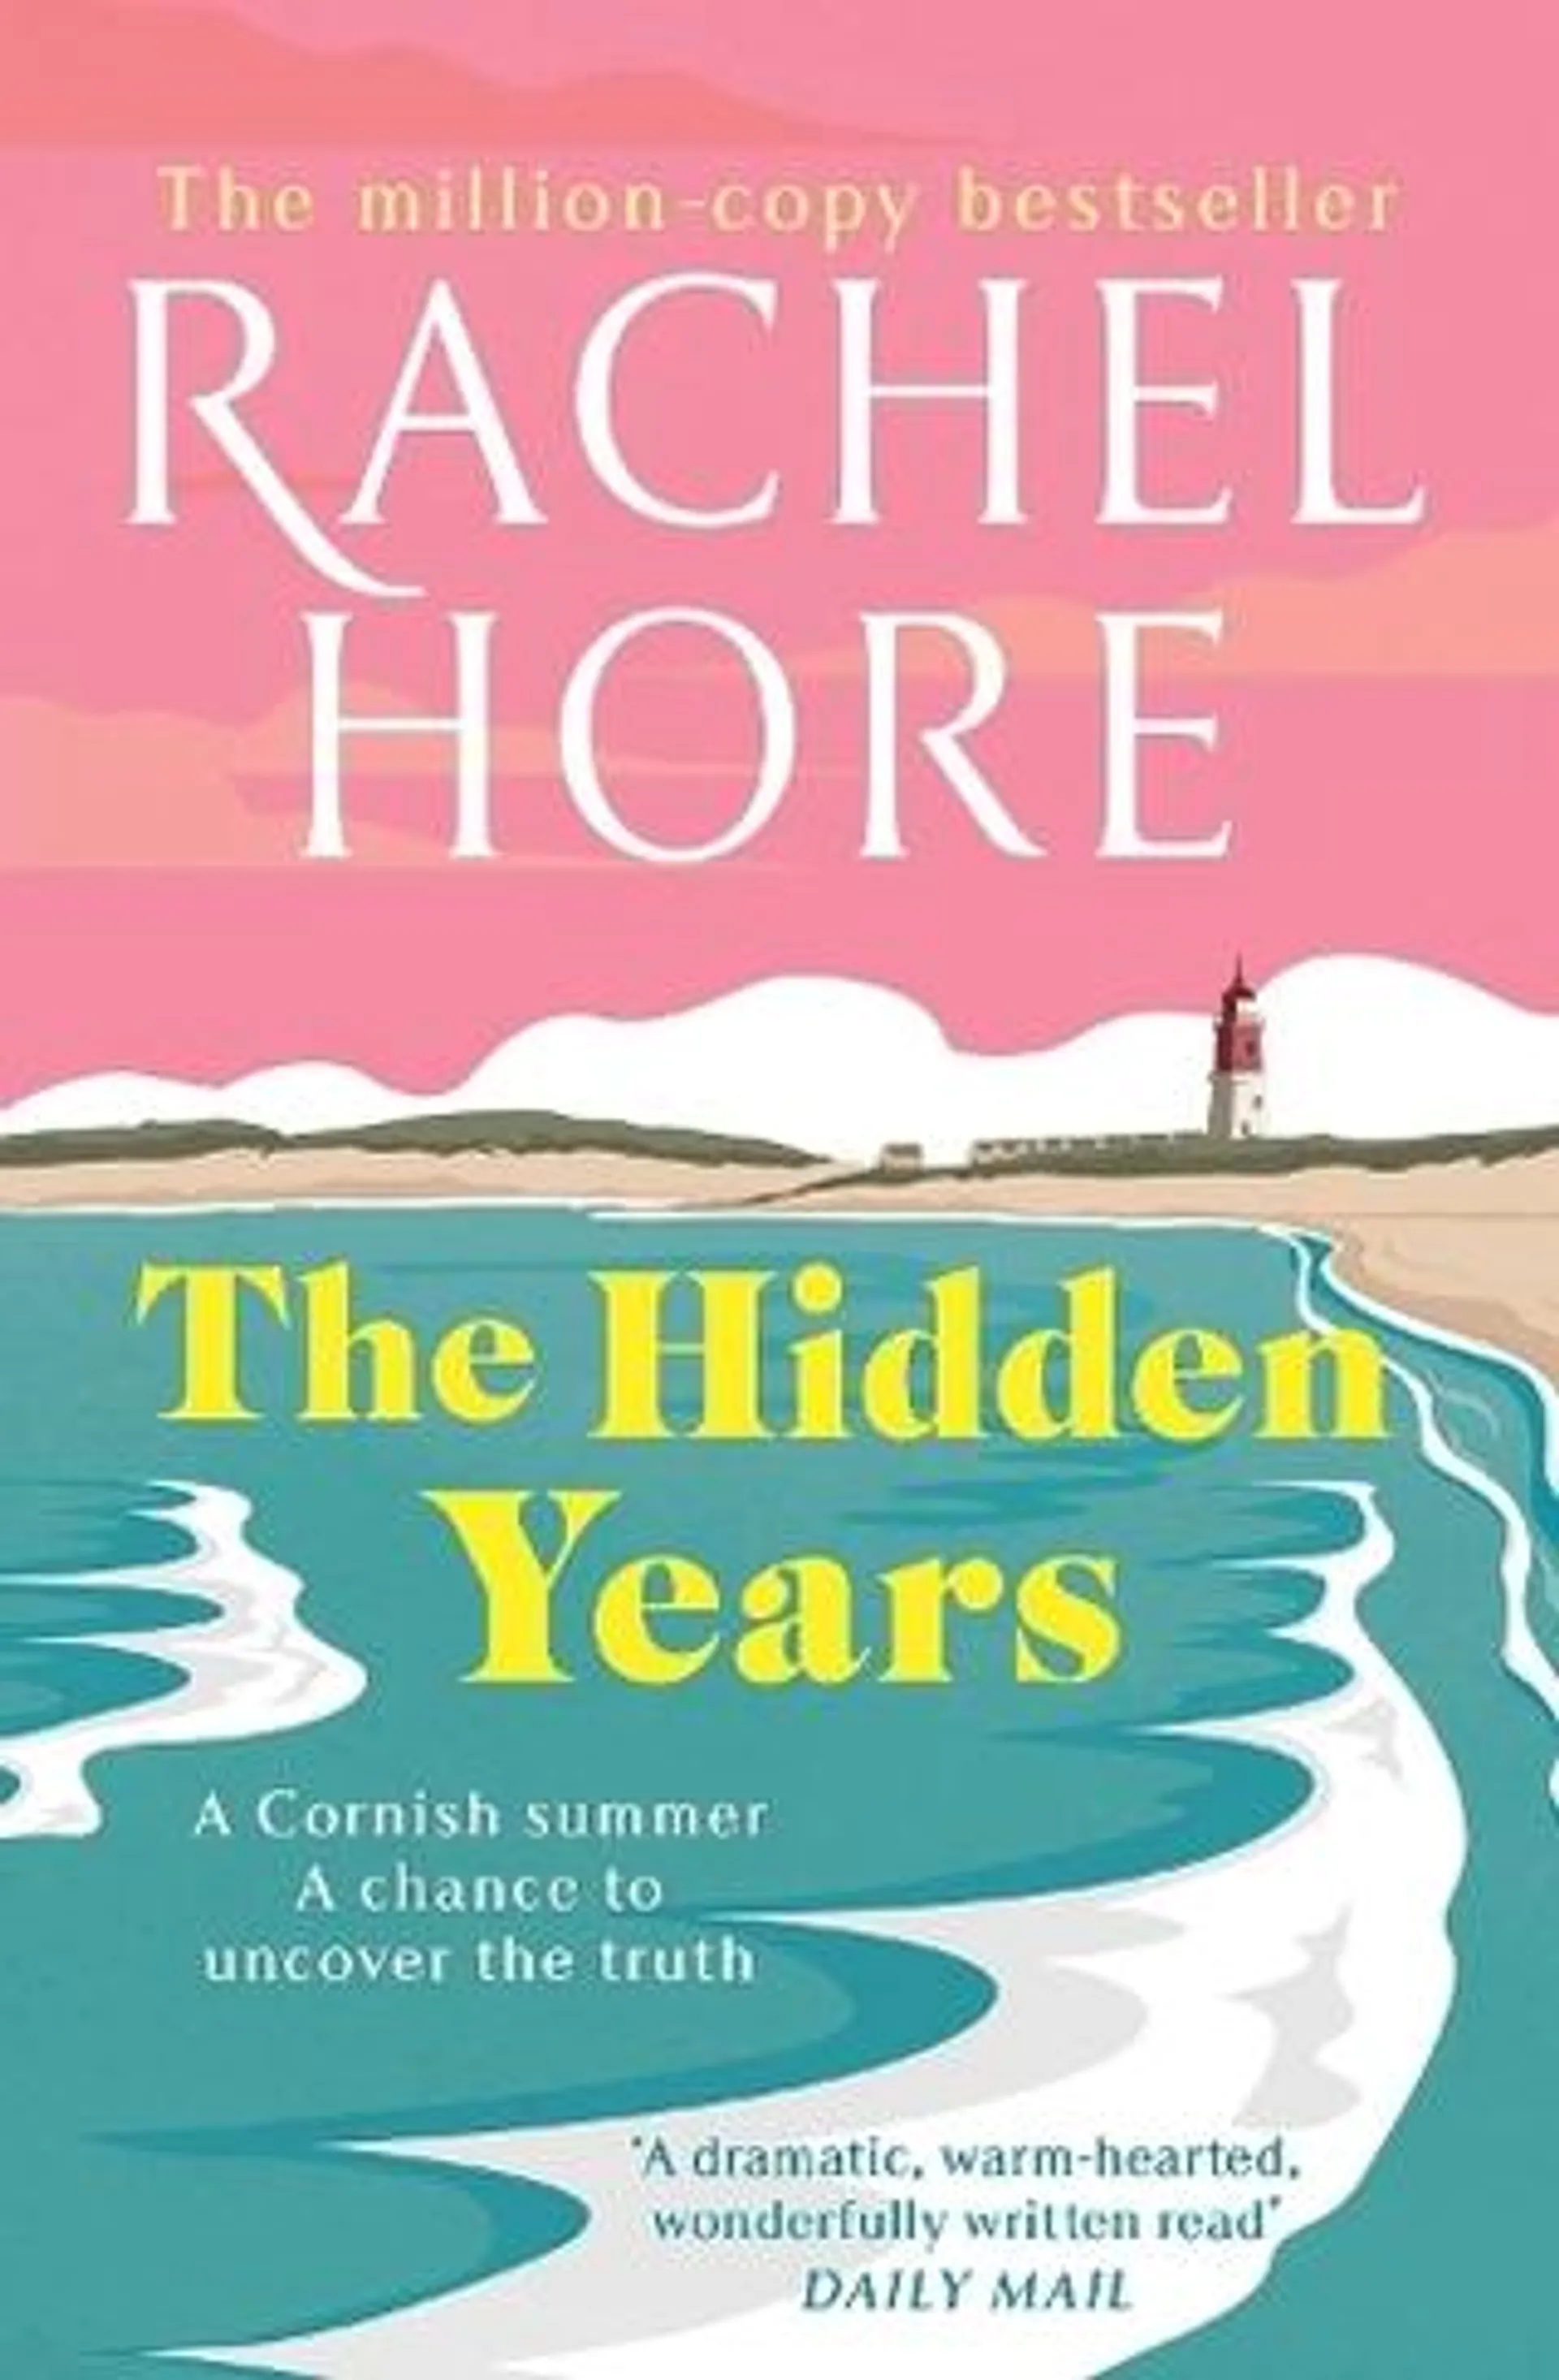 The Hidden Years: Discover the captivating new novel from the million-copy bestseller Rachel Hore